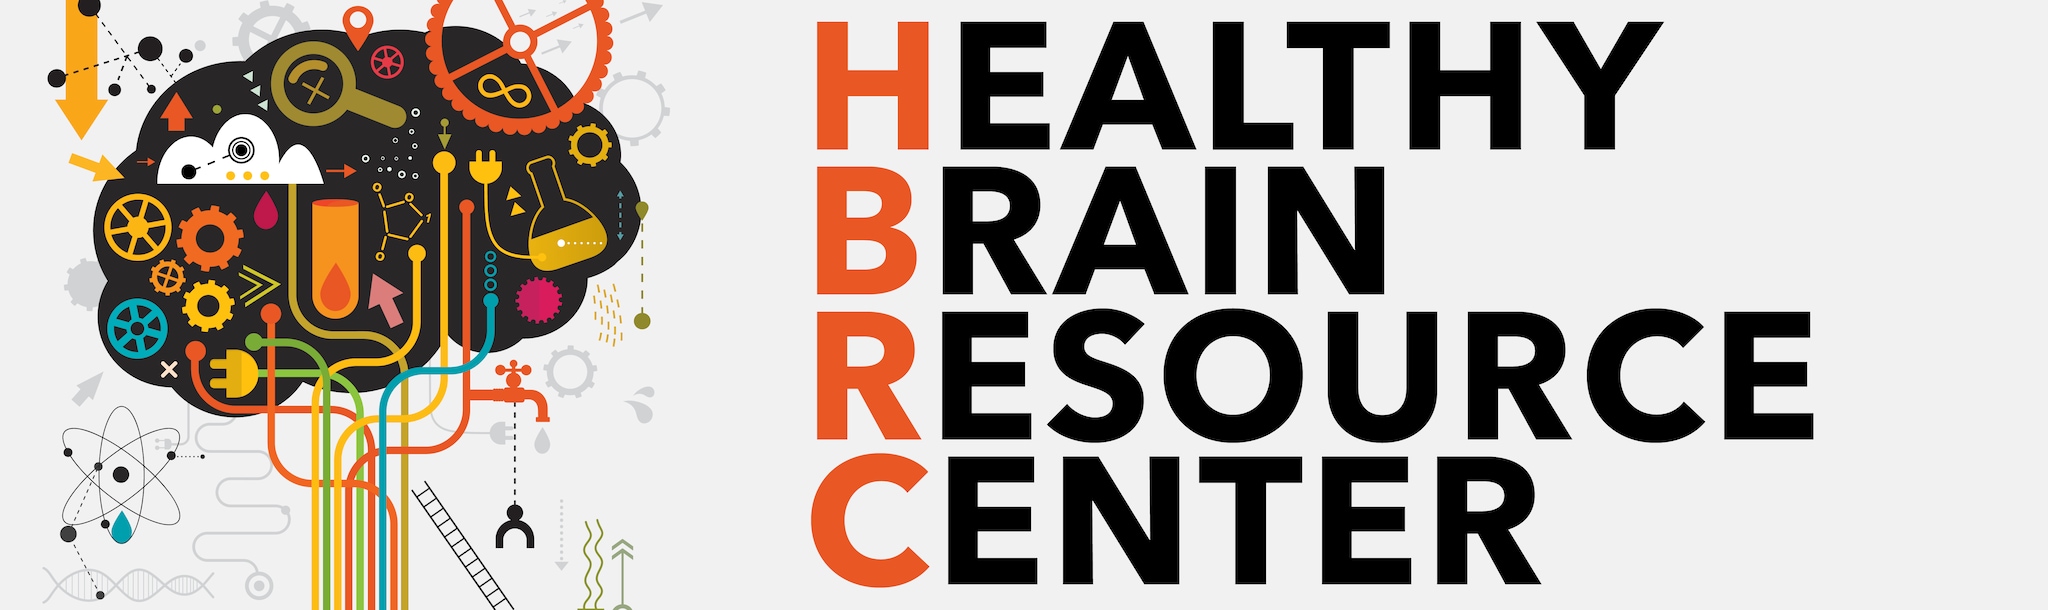 Healthy Brain Resource Center web ready graphic with title and image of brain with various graphic elements